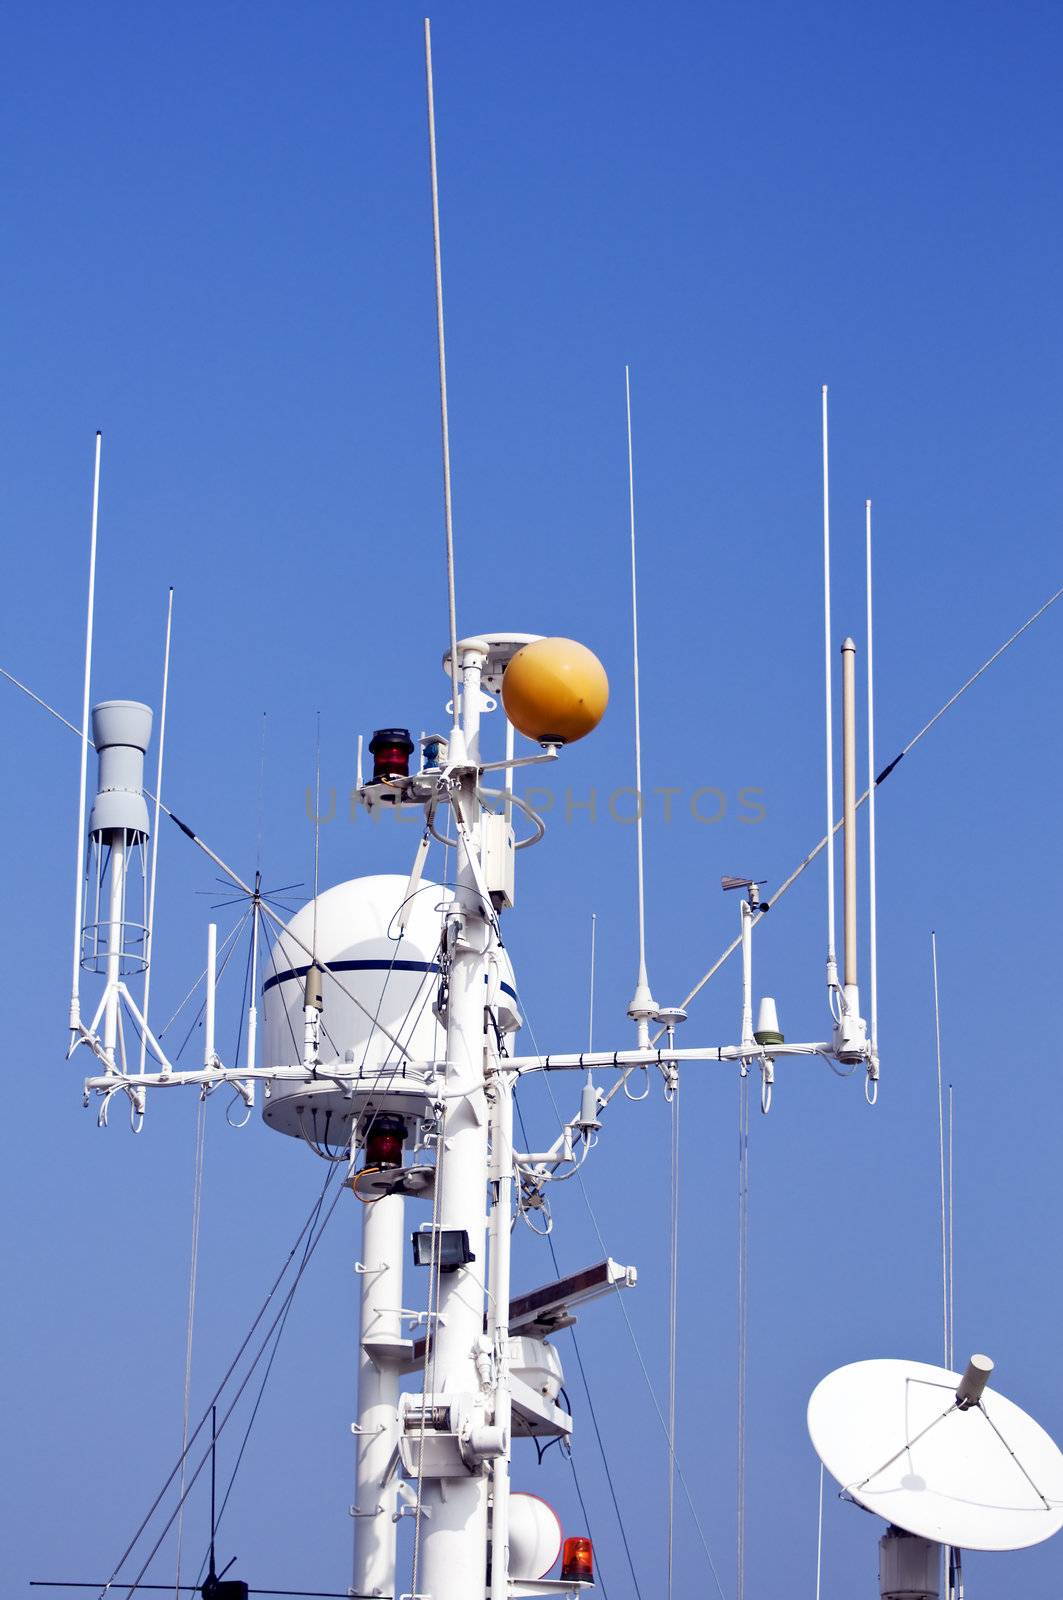 Antenna mast with radar and satellite on a boat